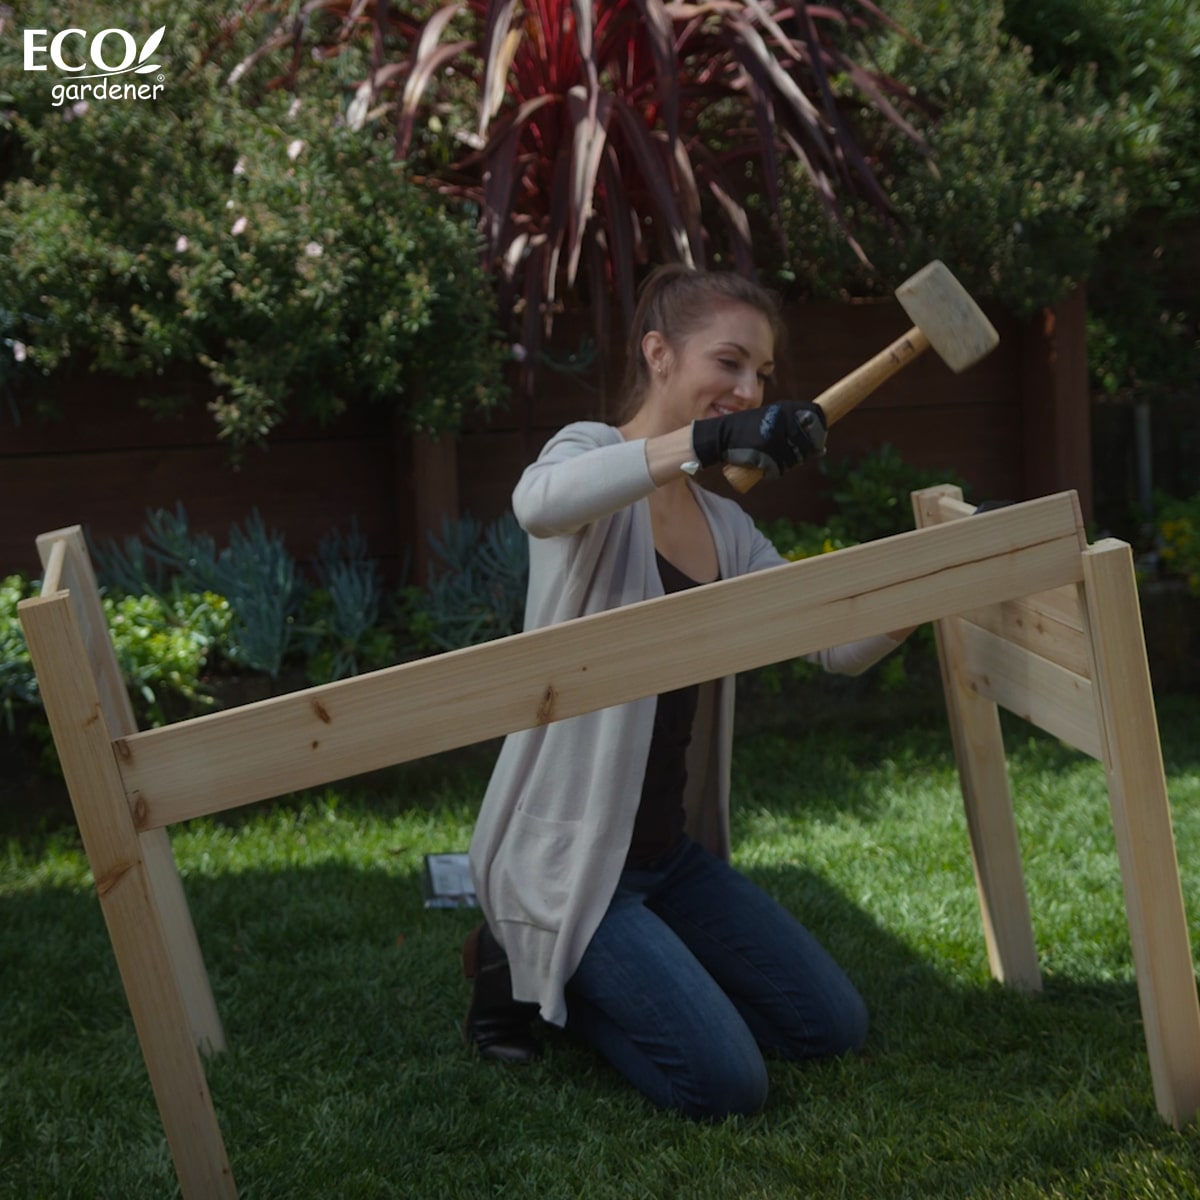 A woman assembling an Ecogardener Elevated Raised Bed